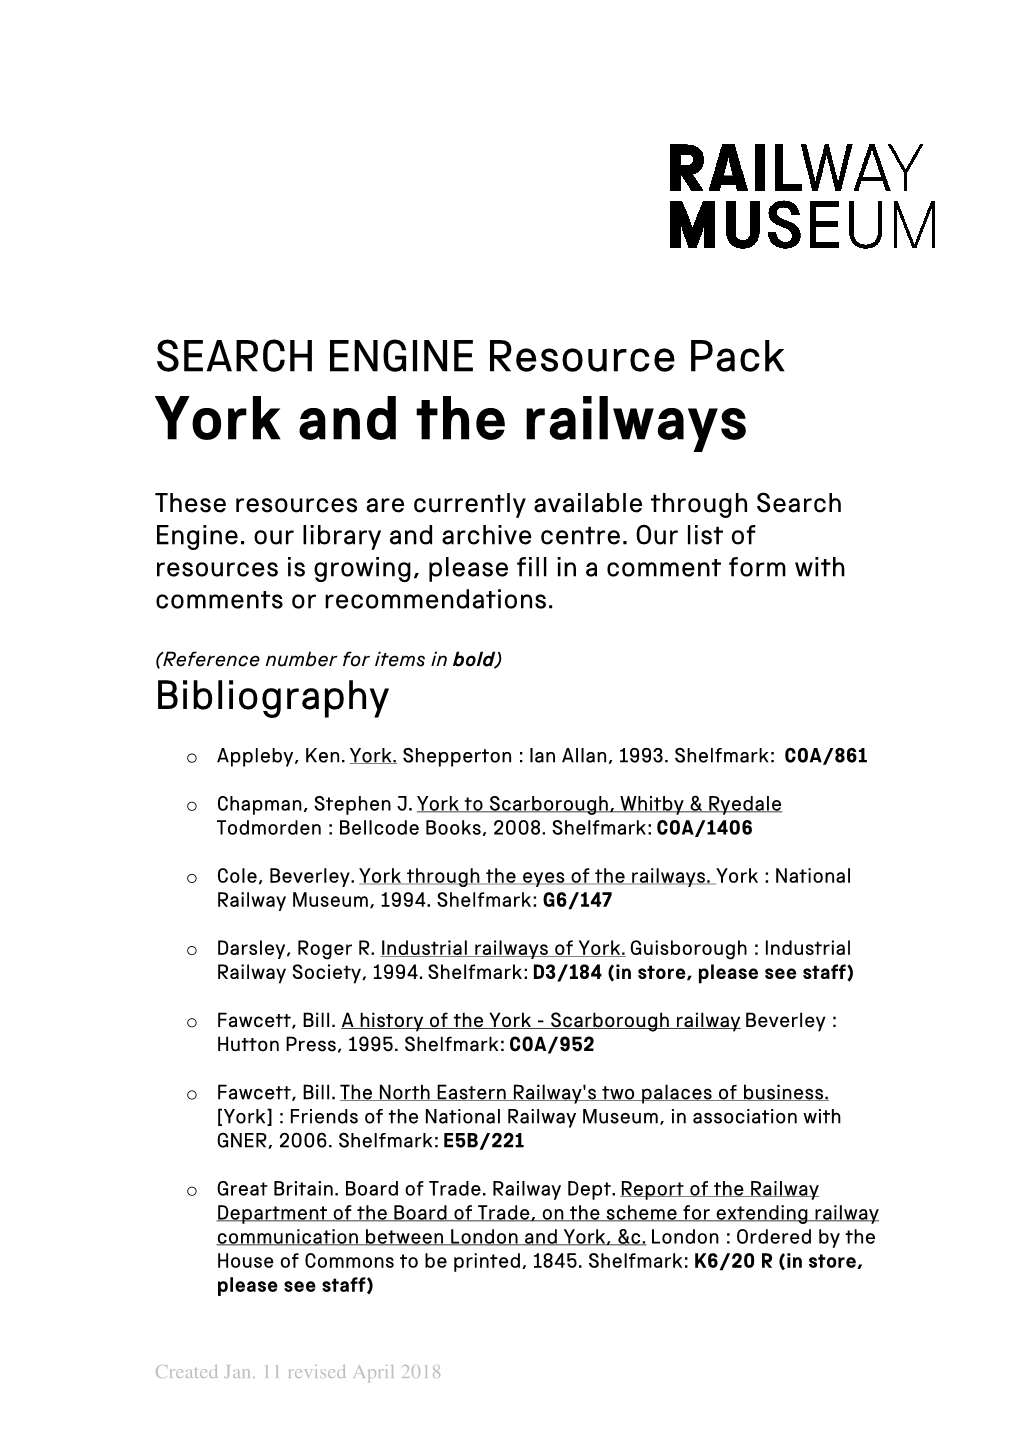 SEARCH ENGINE Resource Pack York and the Railways